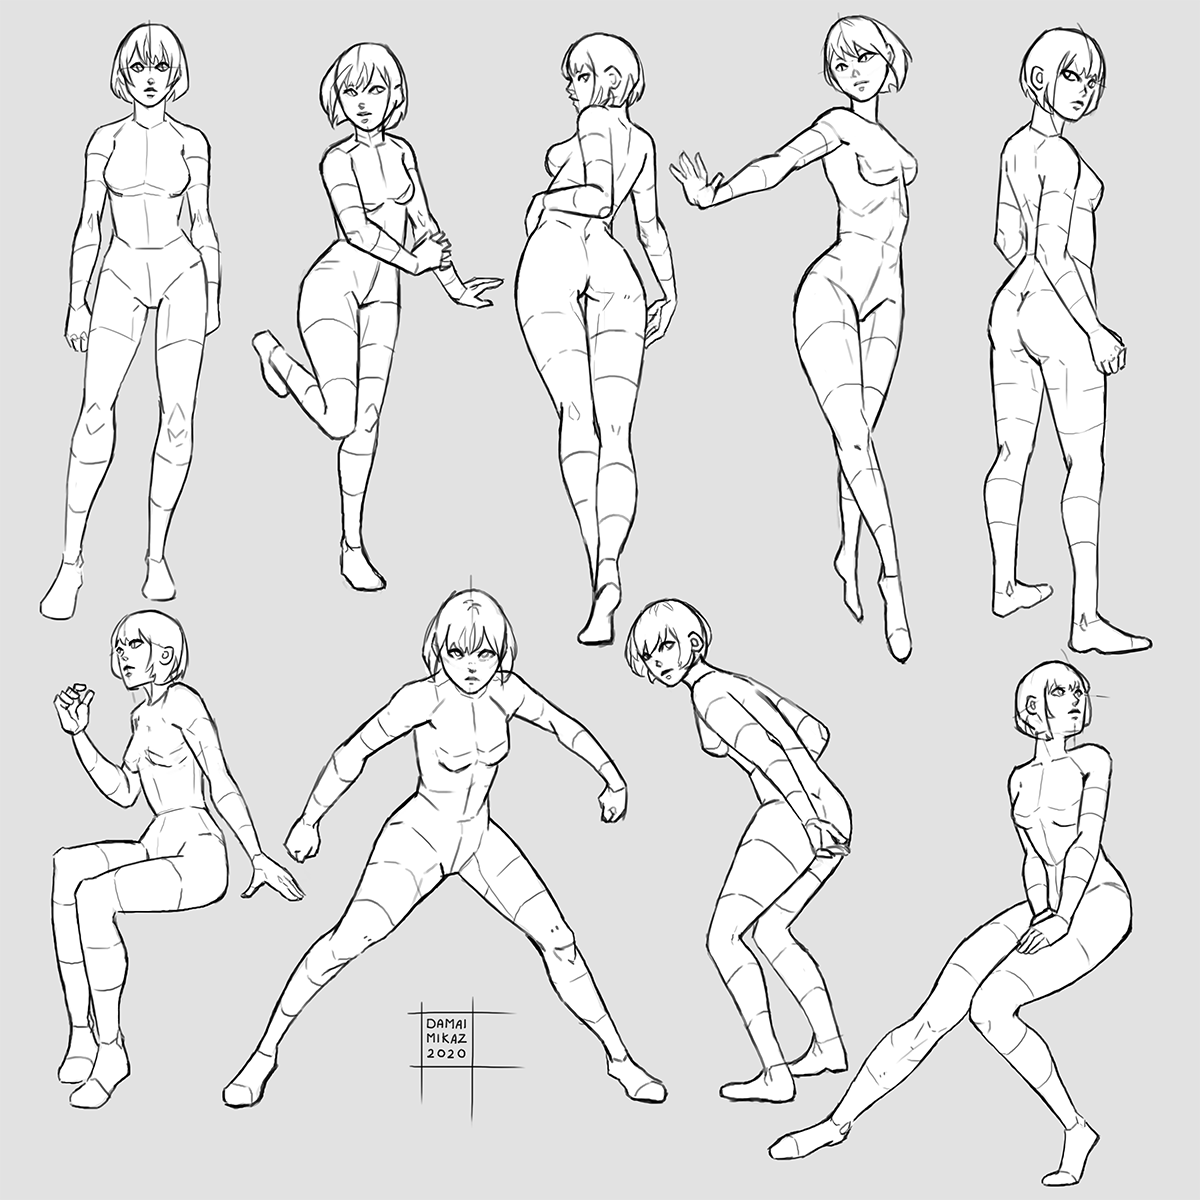 pix Shy Pose Drawing Reference standing pose reference shy.